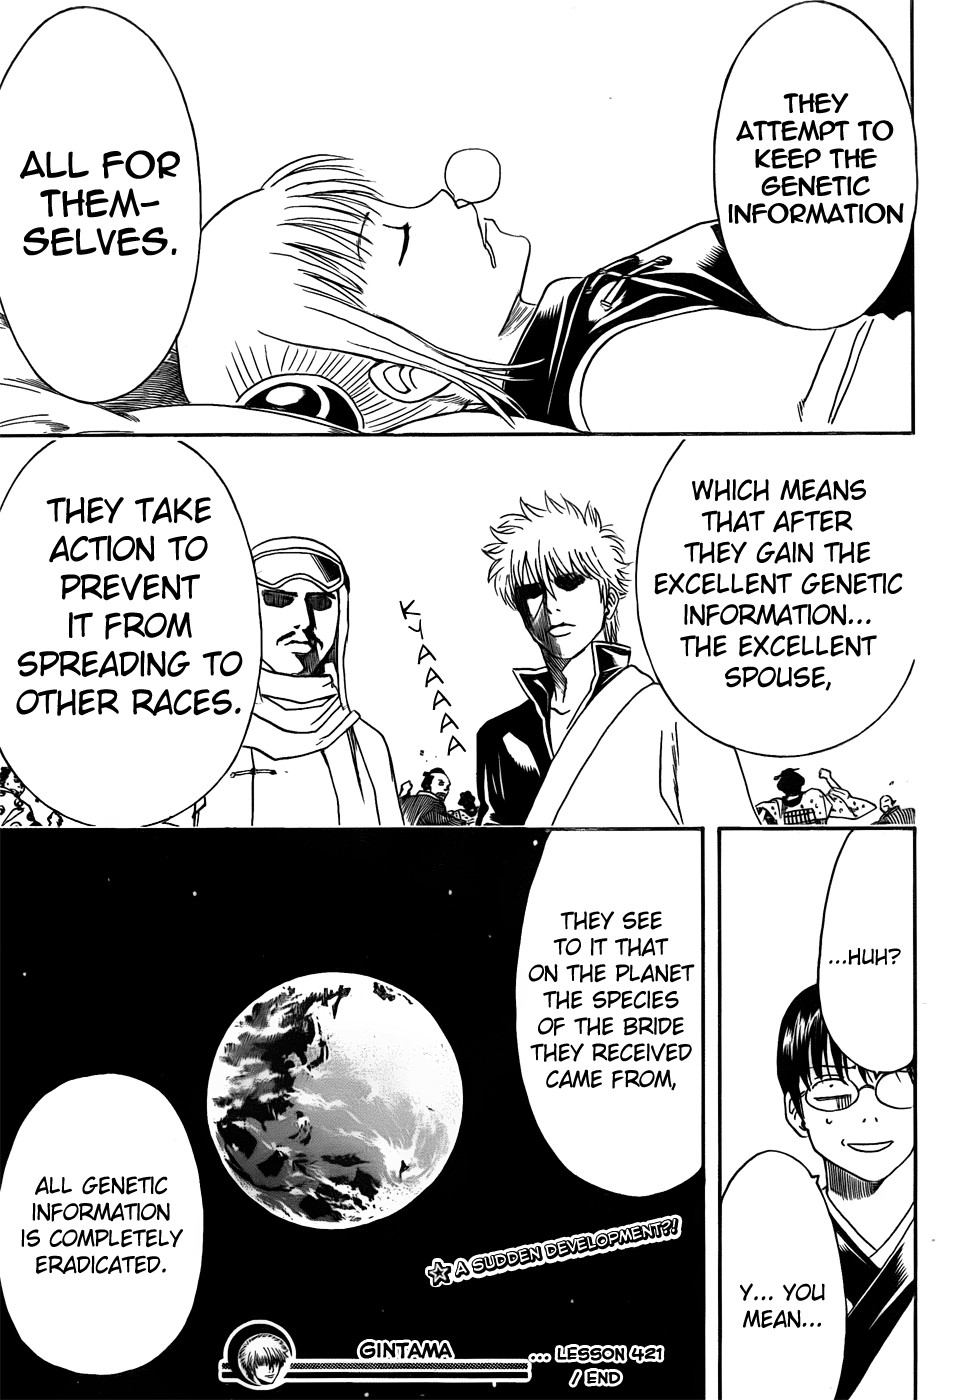 Gintama chapter 421 page 18